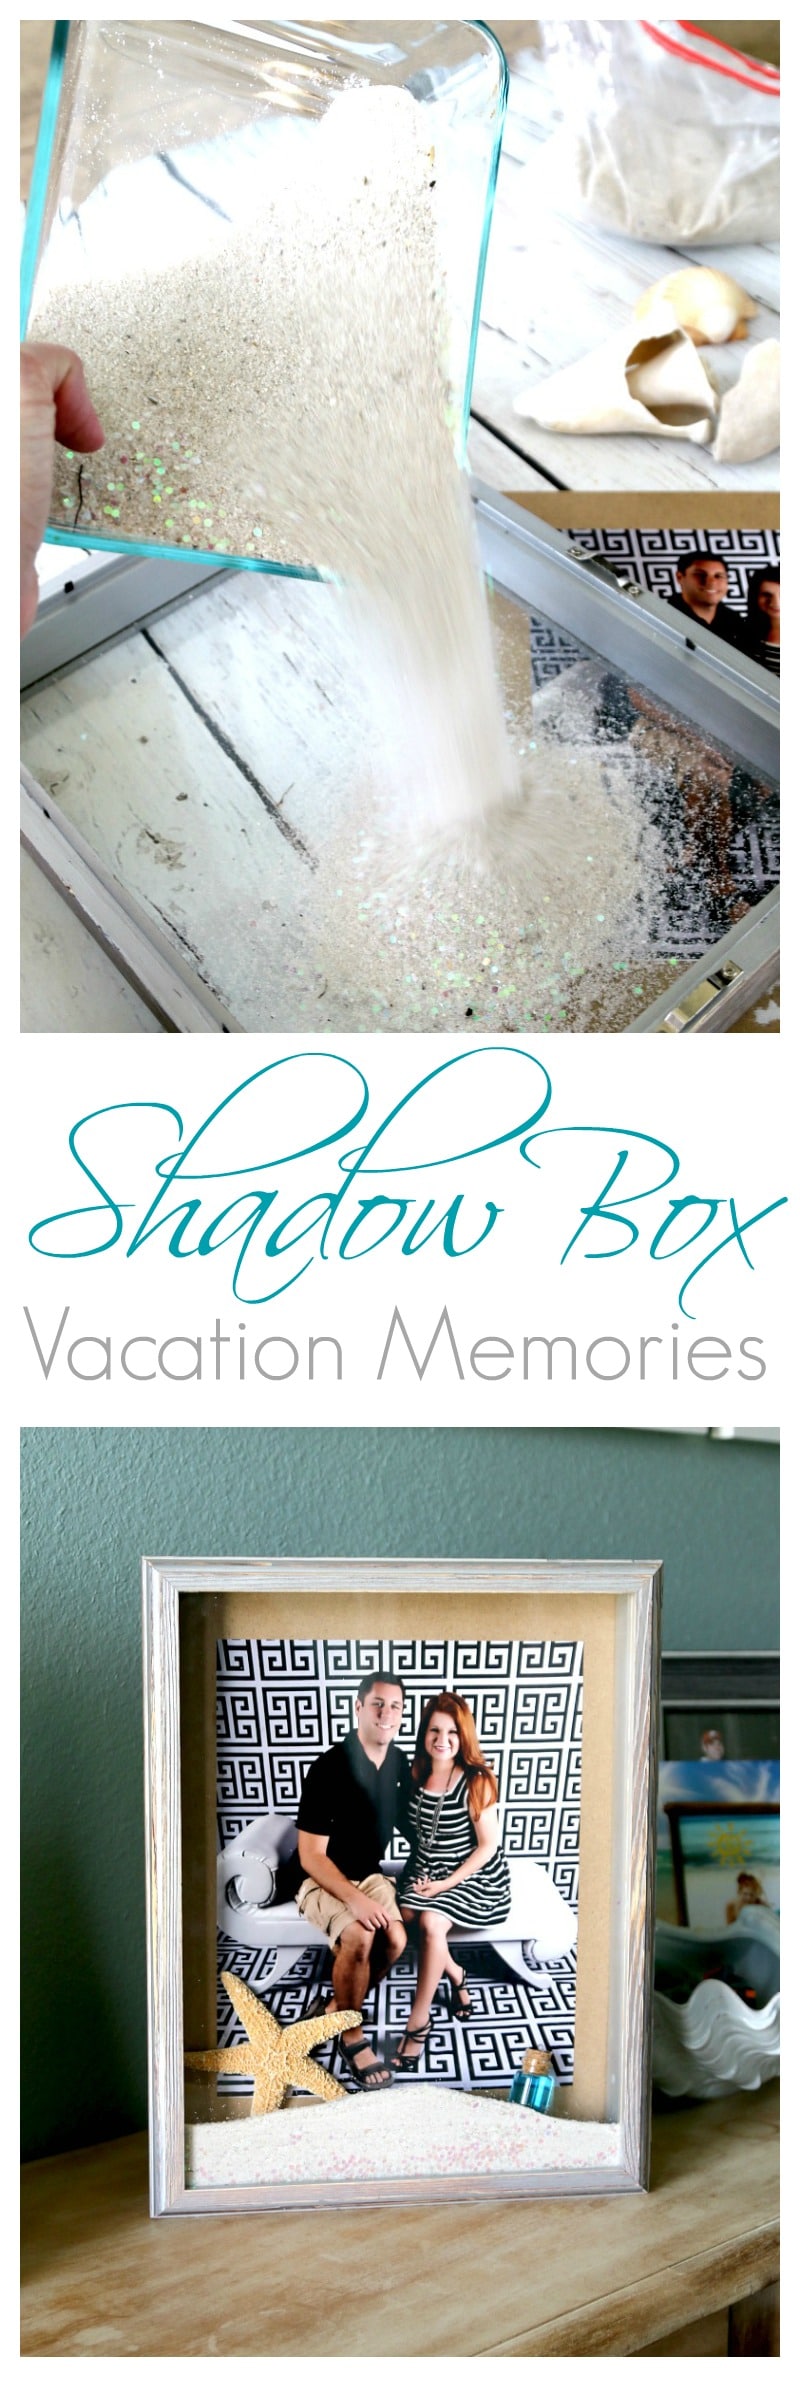 Beach DIY: Create Custom Memory Shadow Boxes with collected shells and sand from your vacation destination, so fun and easy! Gorgeous display for home decor